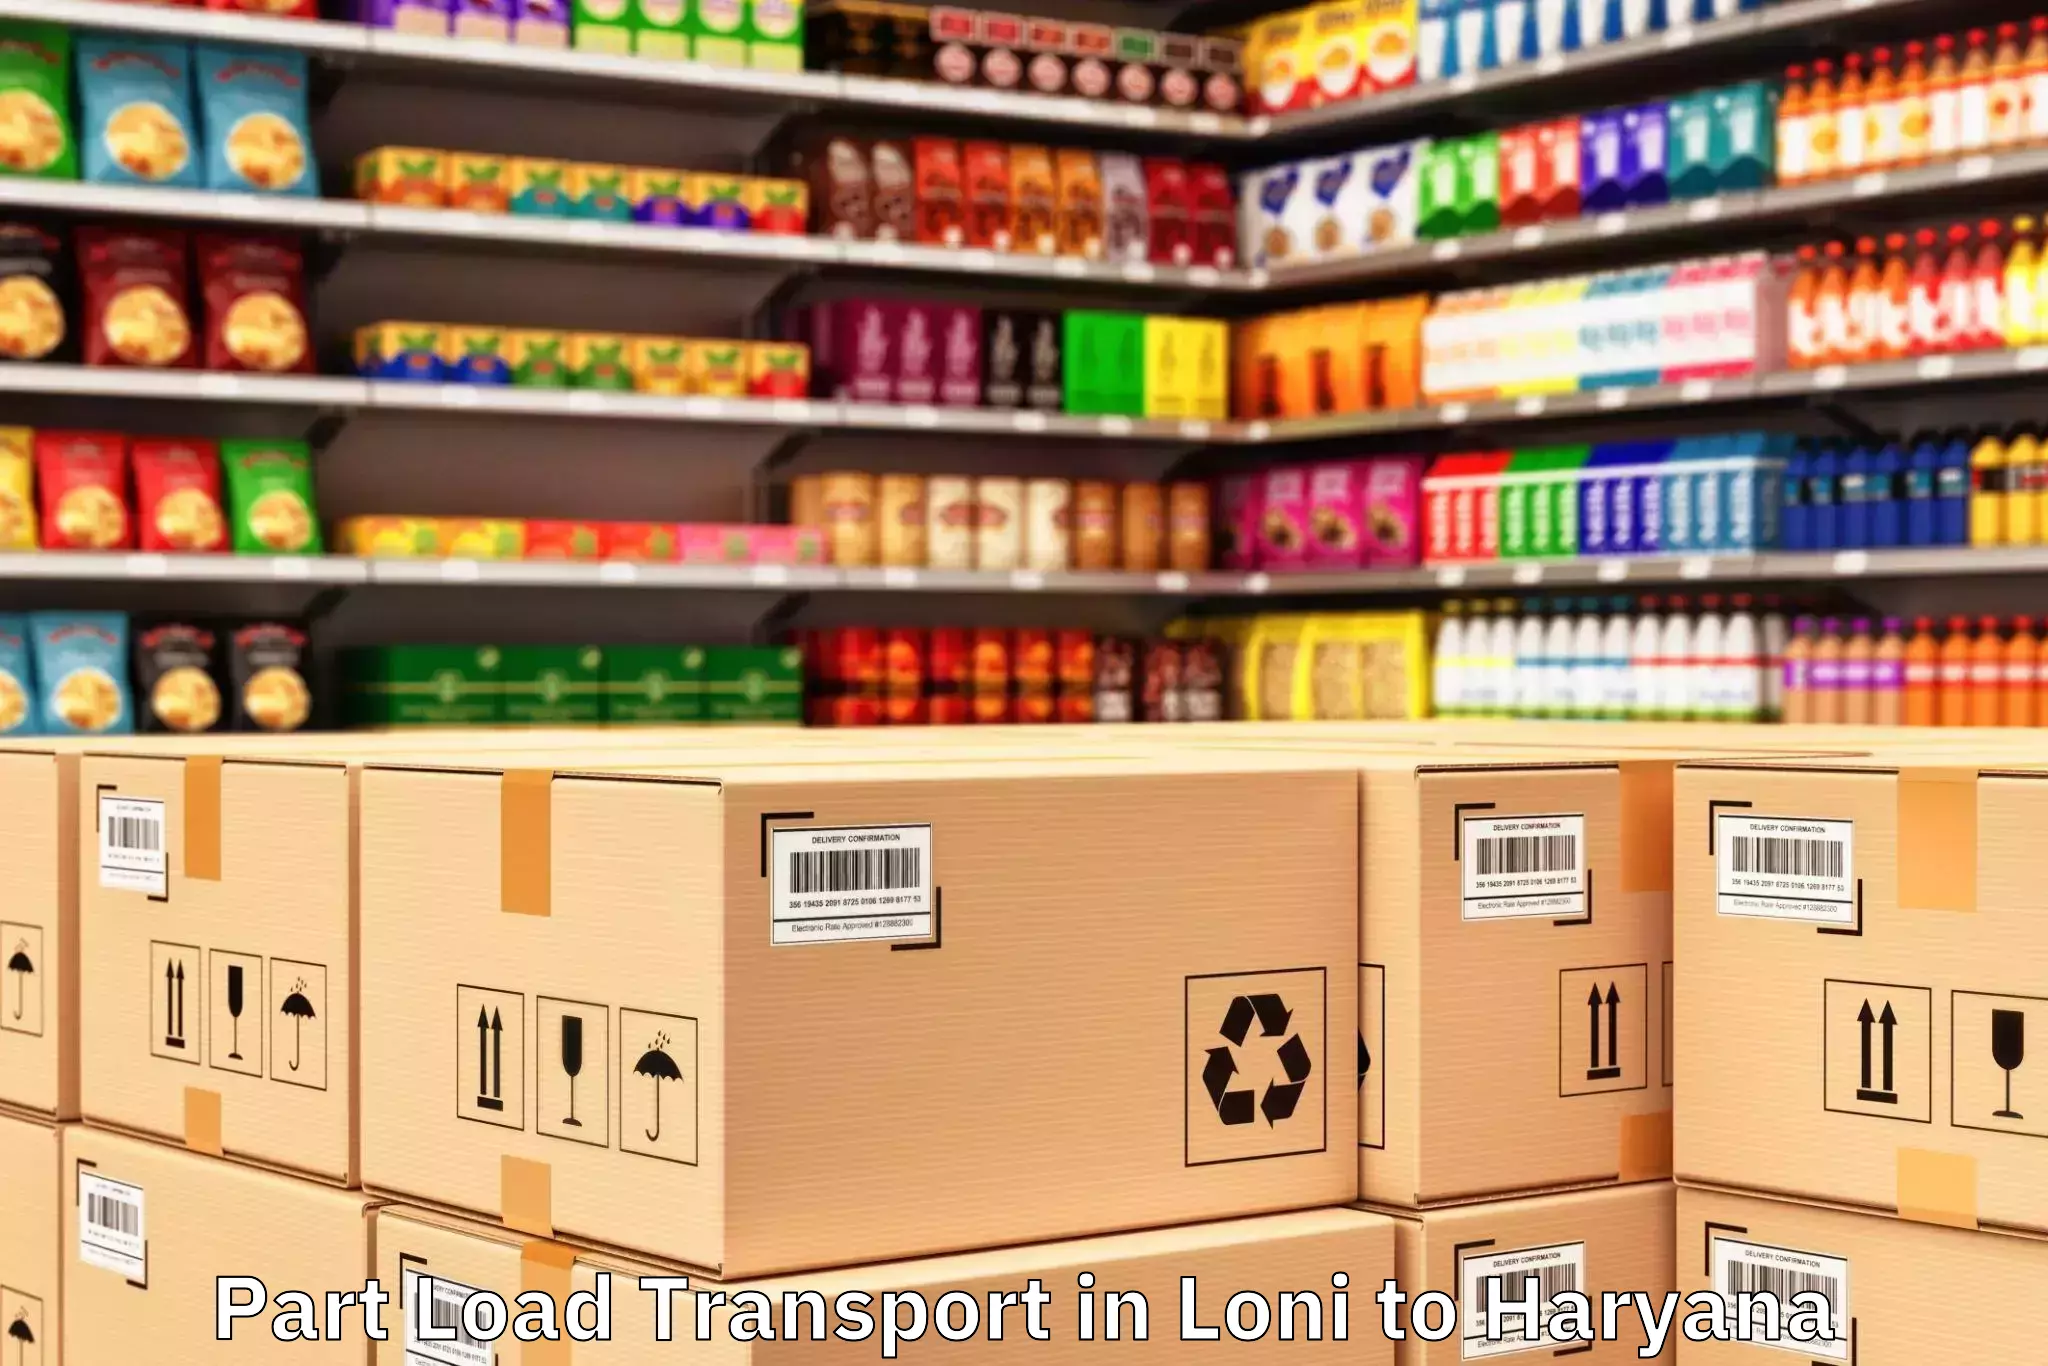 Top Loni to Haryana Part Load Transport Available